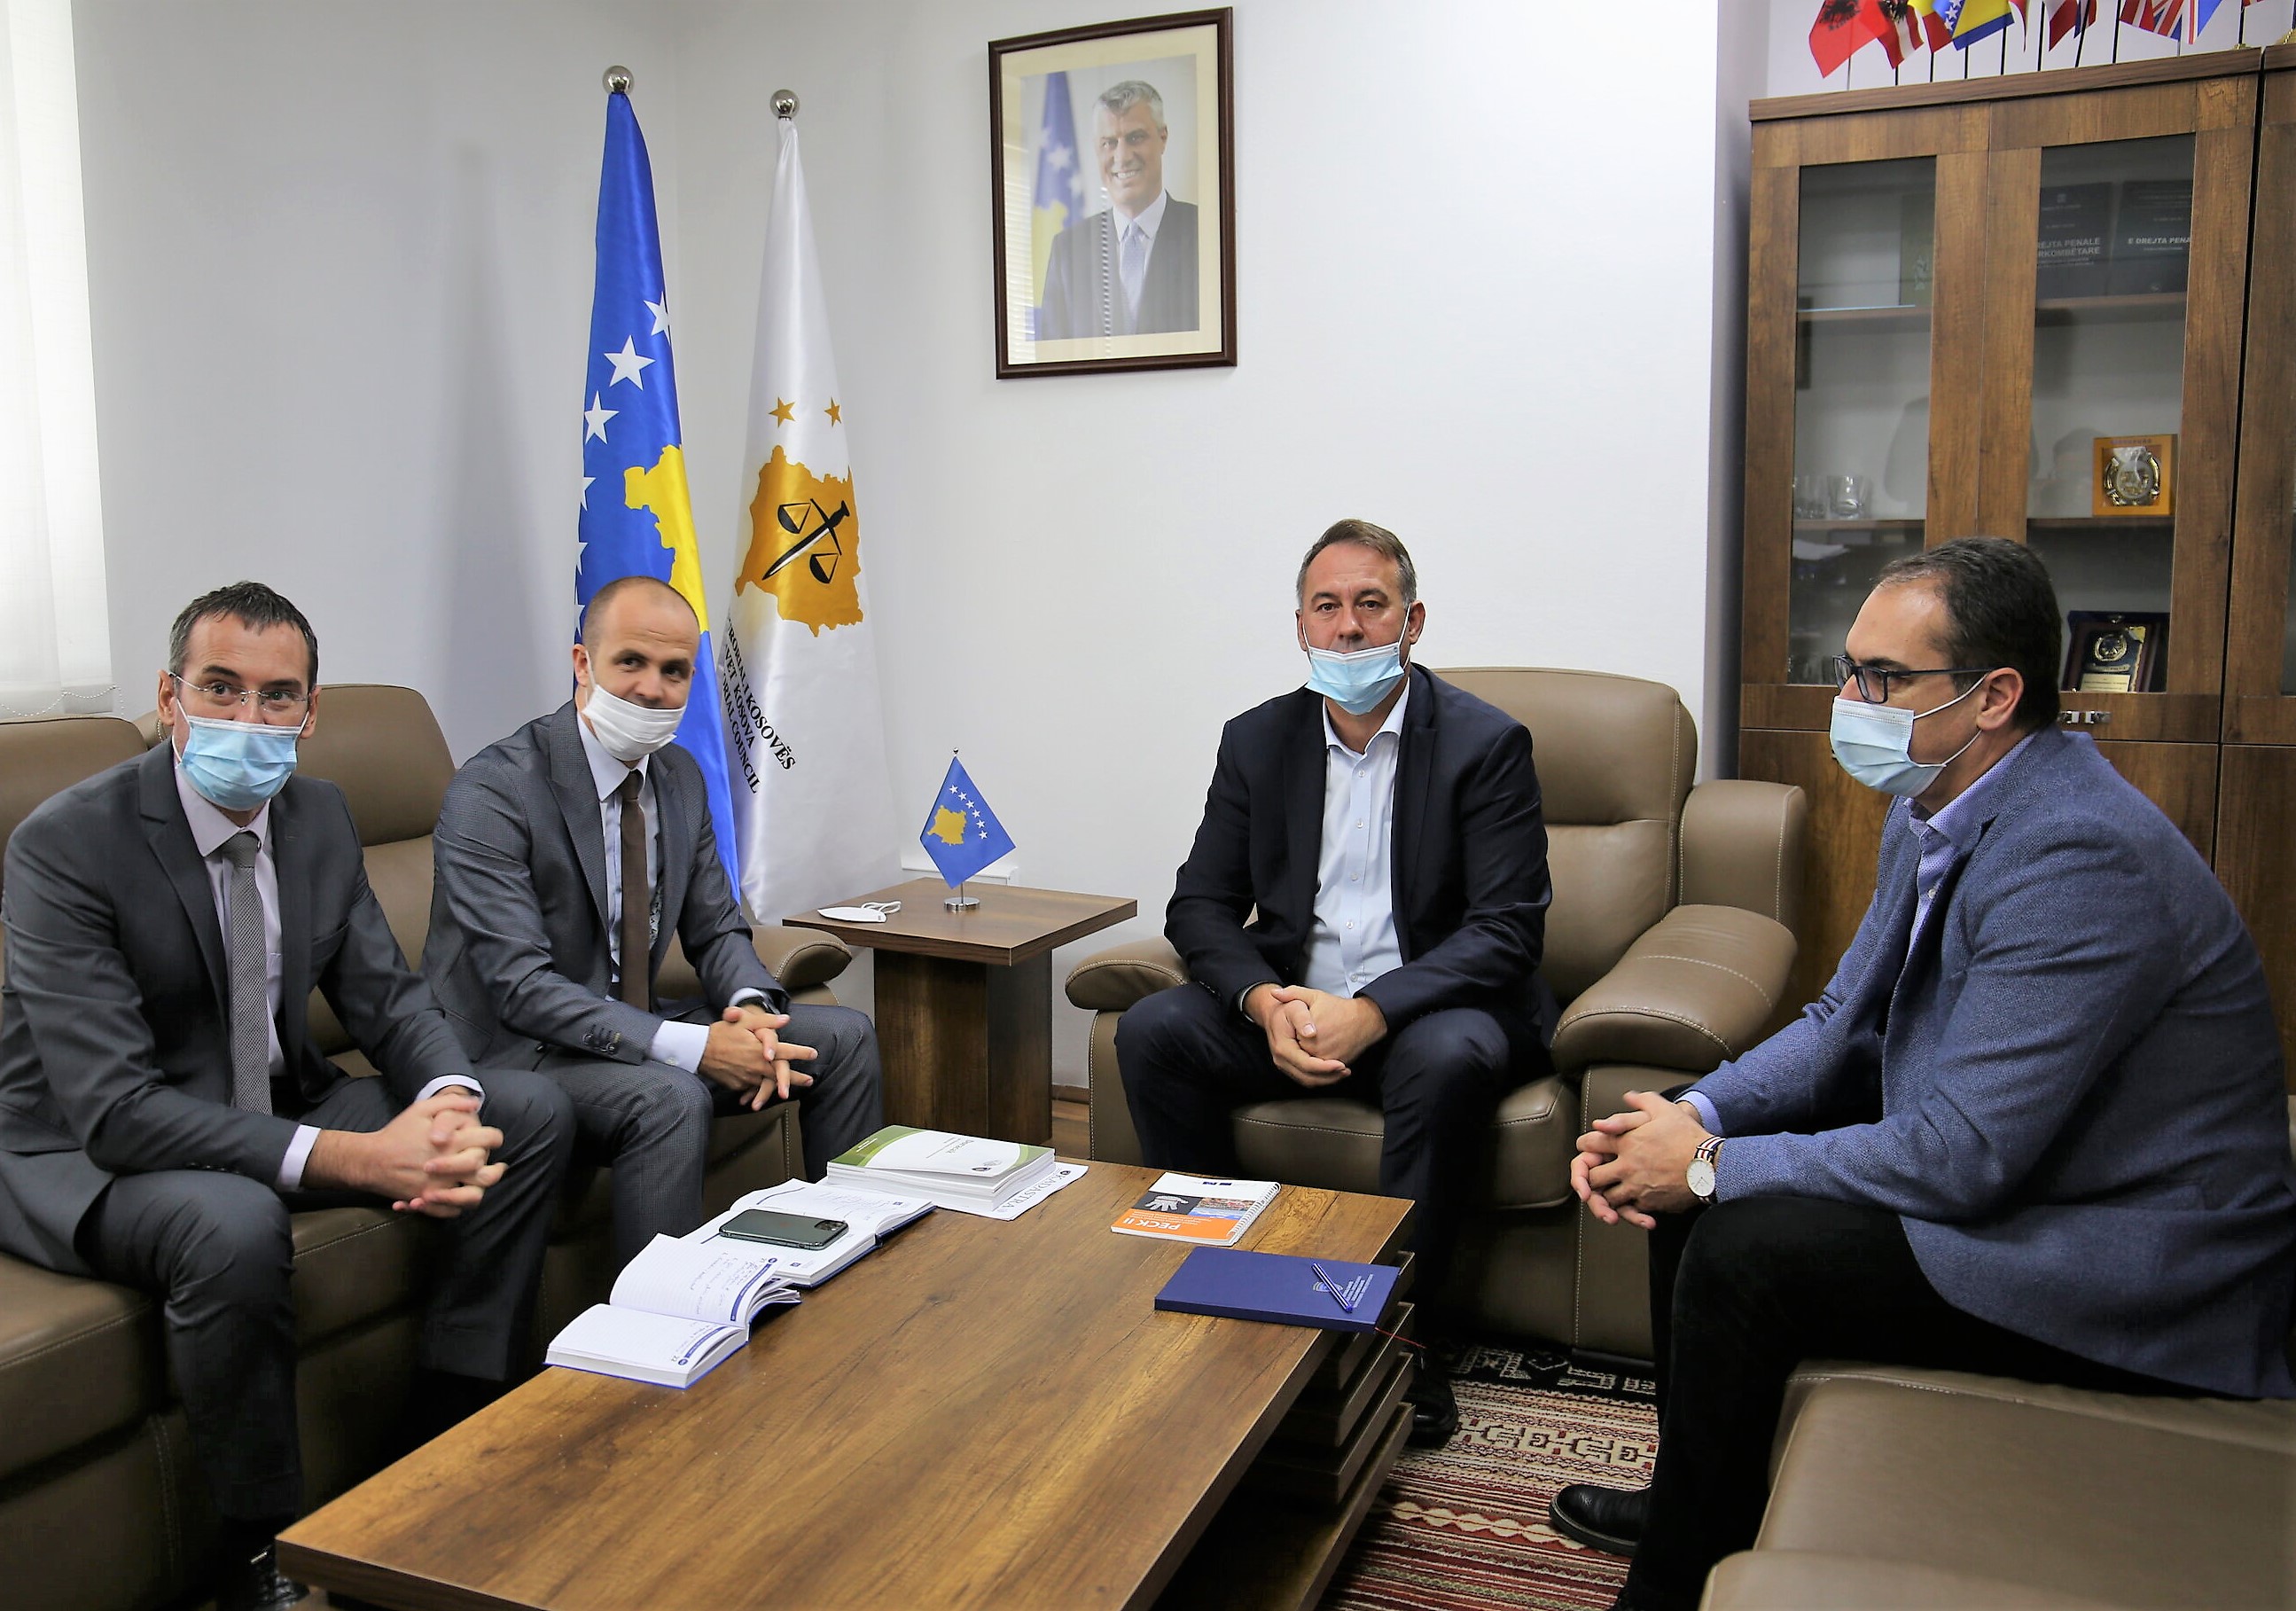 Chairman Hyseni received in a meeting the Chief Executive Officer of KCA, Mr. Ahmeti